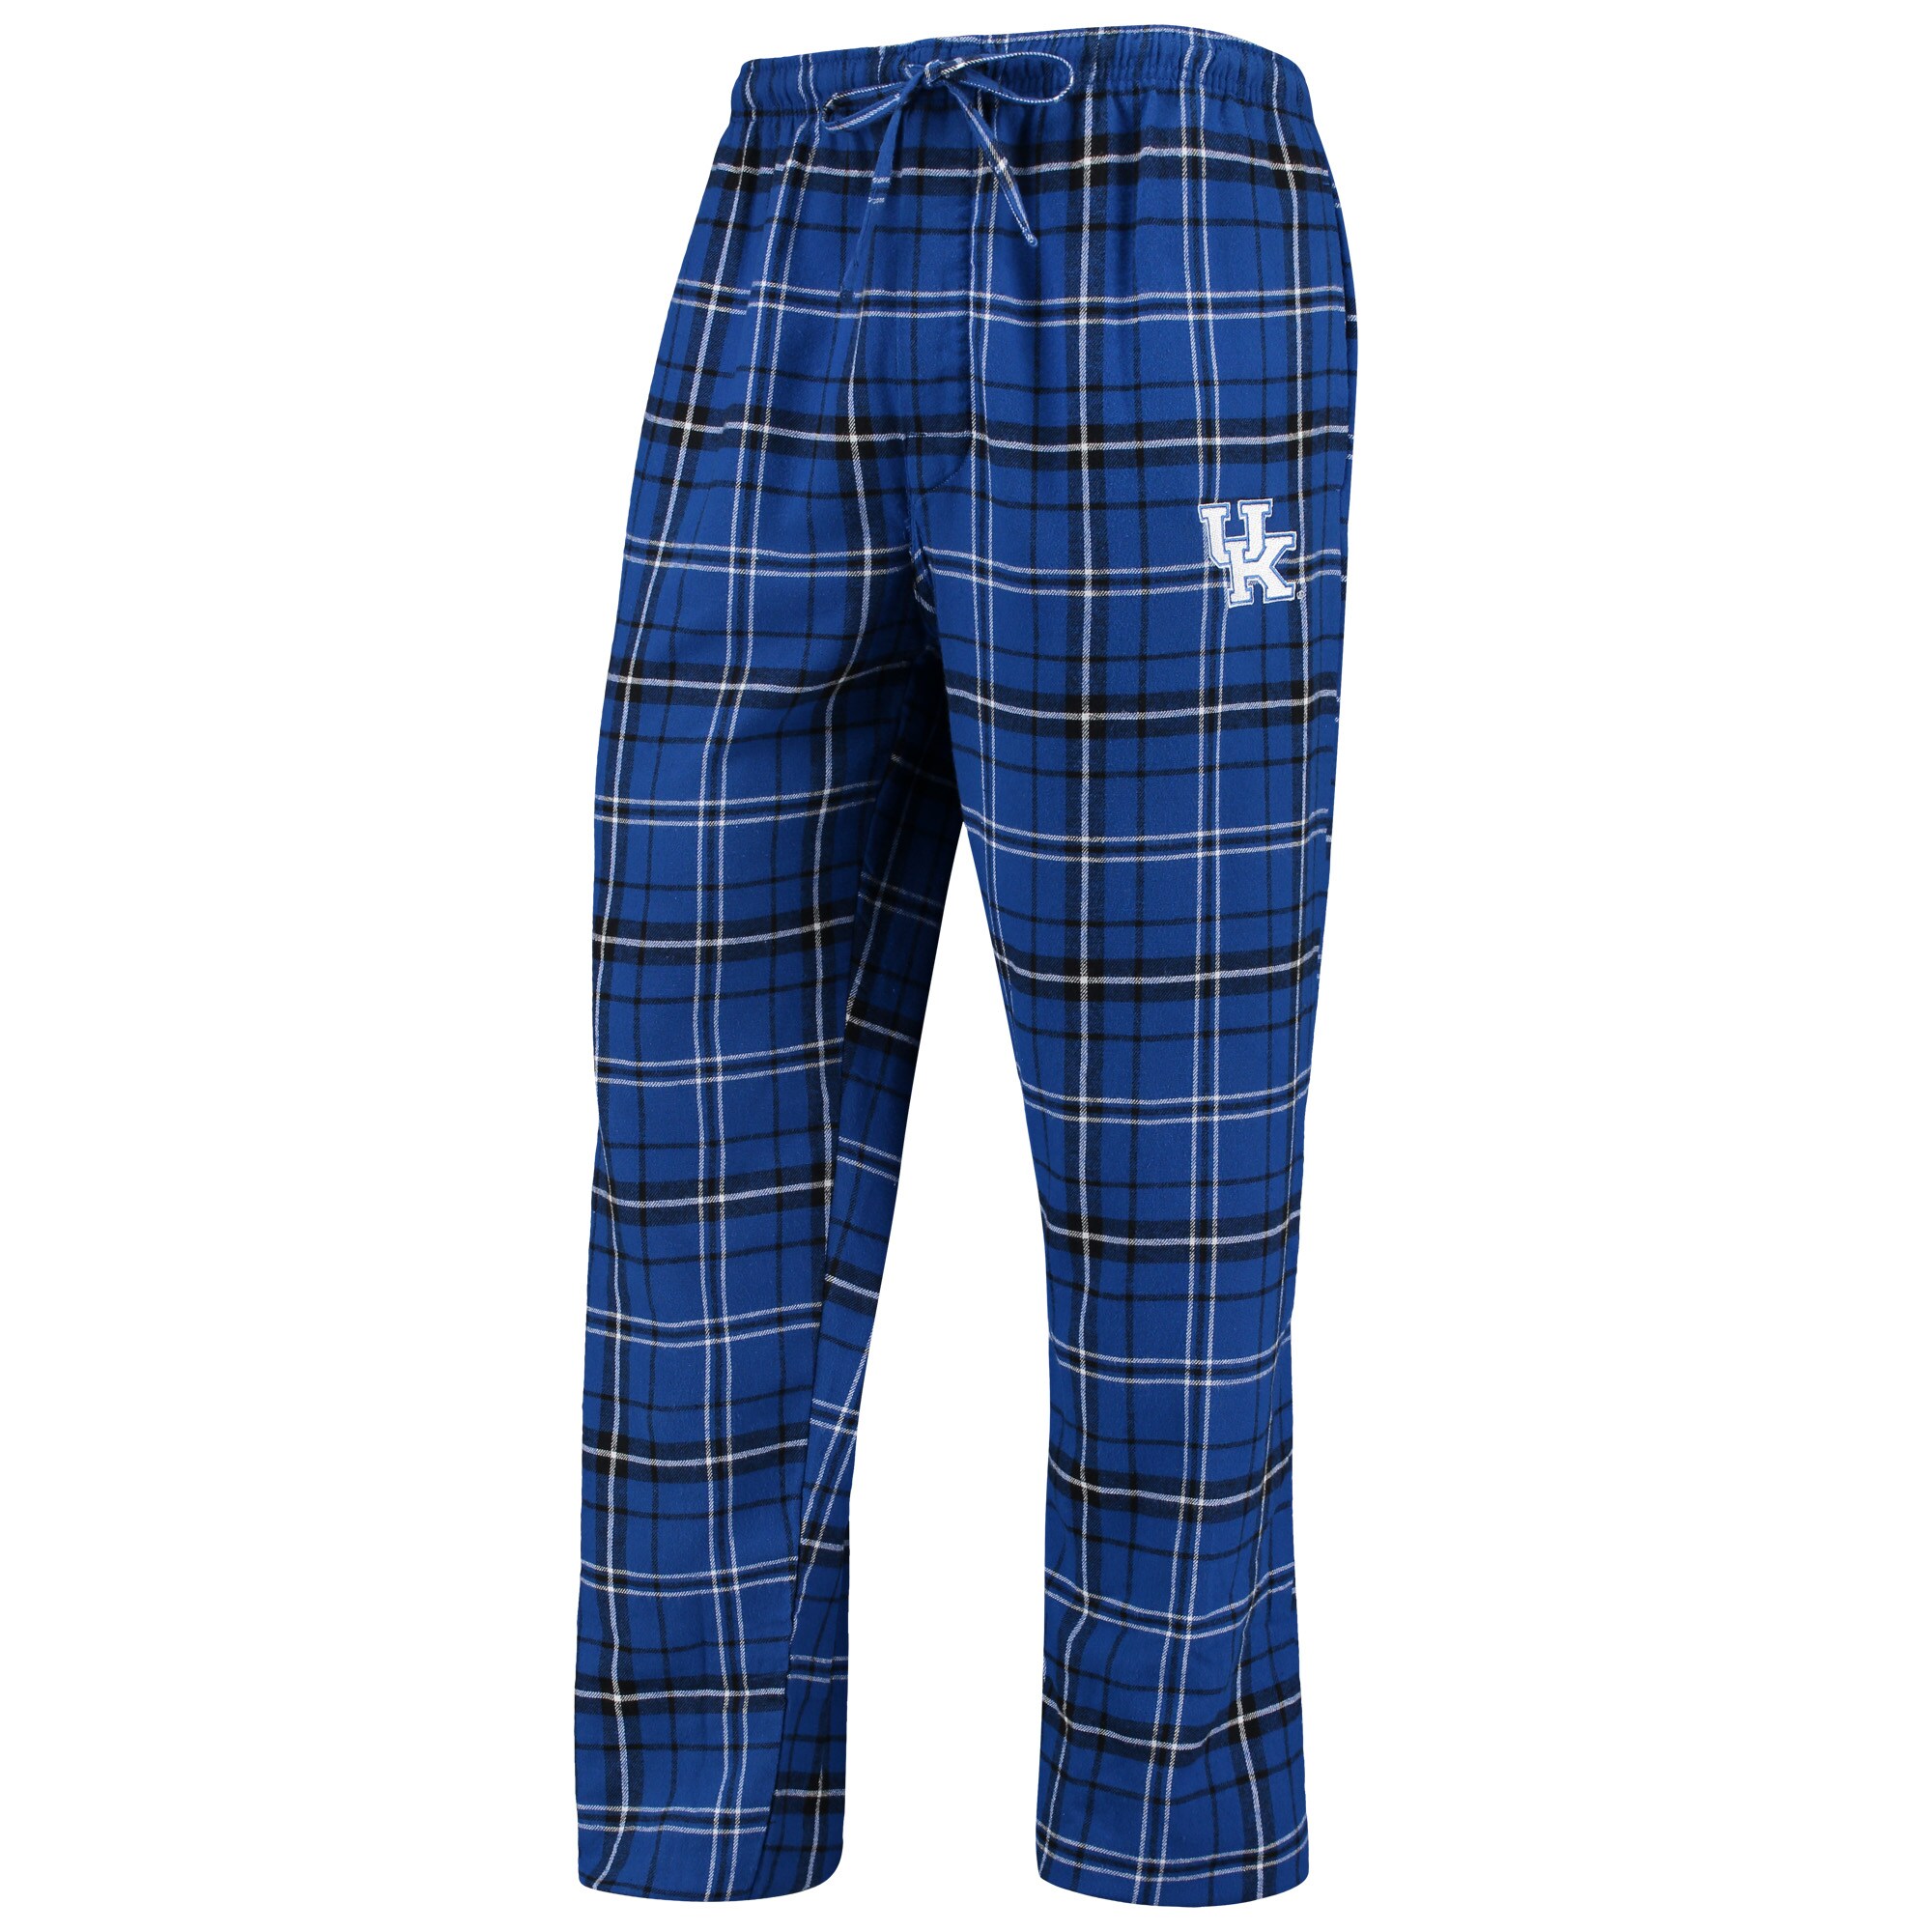 Men's Concepts Sport Royal/Black Kentucky Wildcats Ultimate Flannel Pants - image 1 of 3